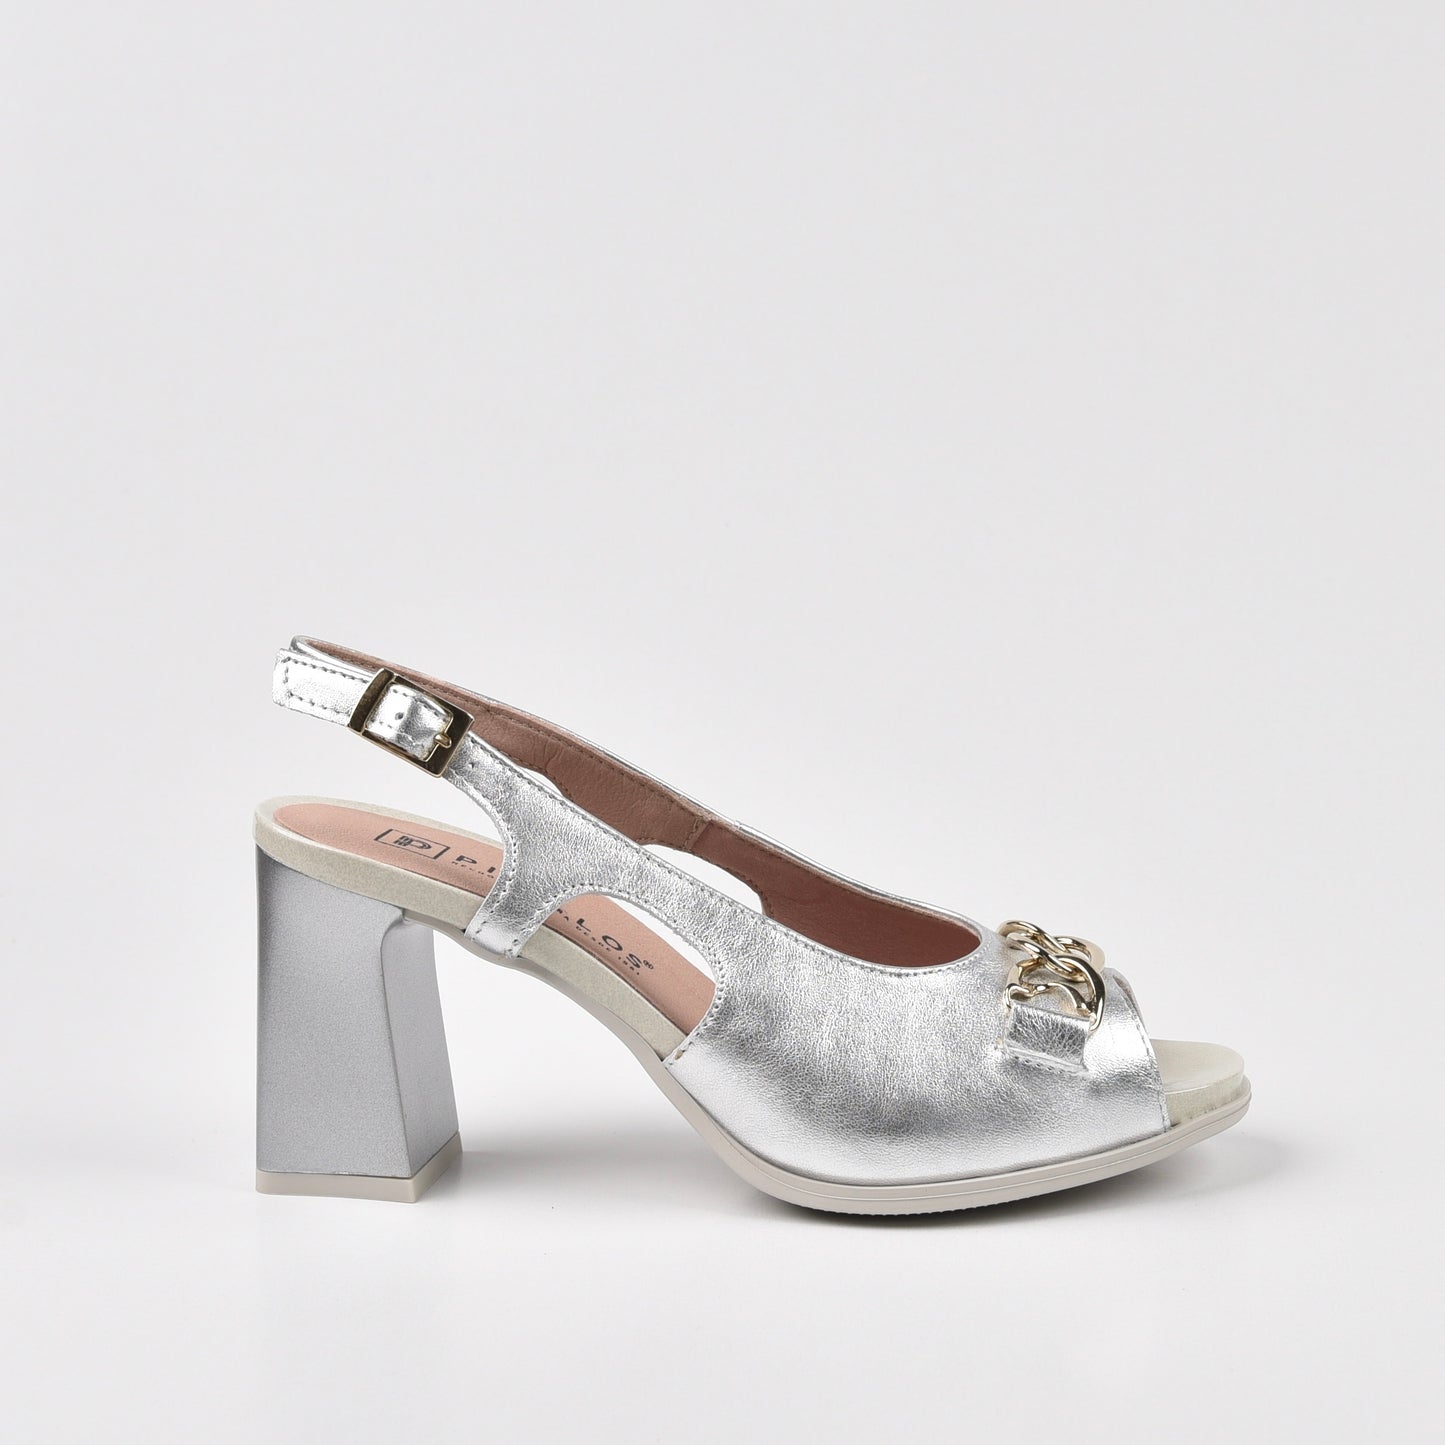 Pitillos Spanish Classic High-Heel Sandal for Women in Silver .